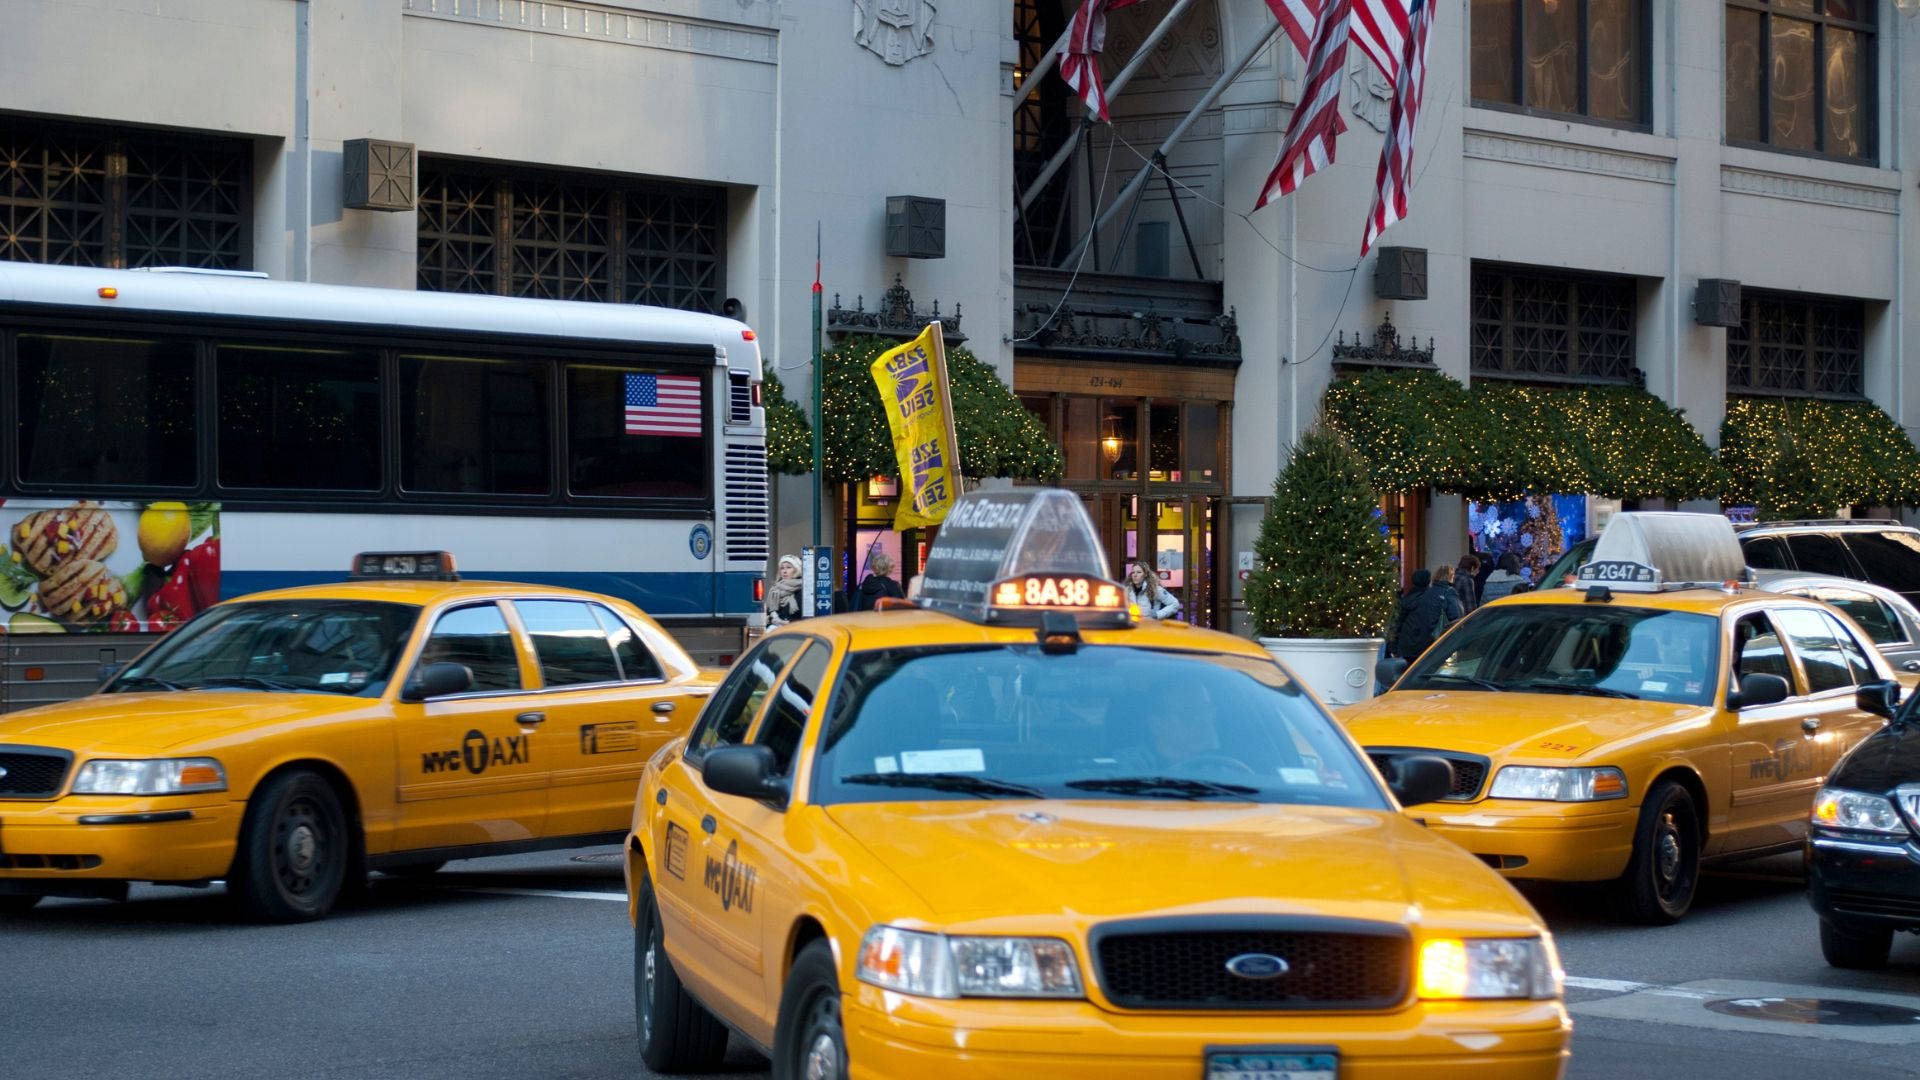 Gul Taxi Cab In Lord & Taylor New York City Wallpaper